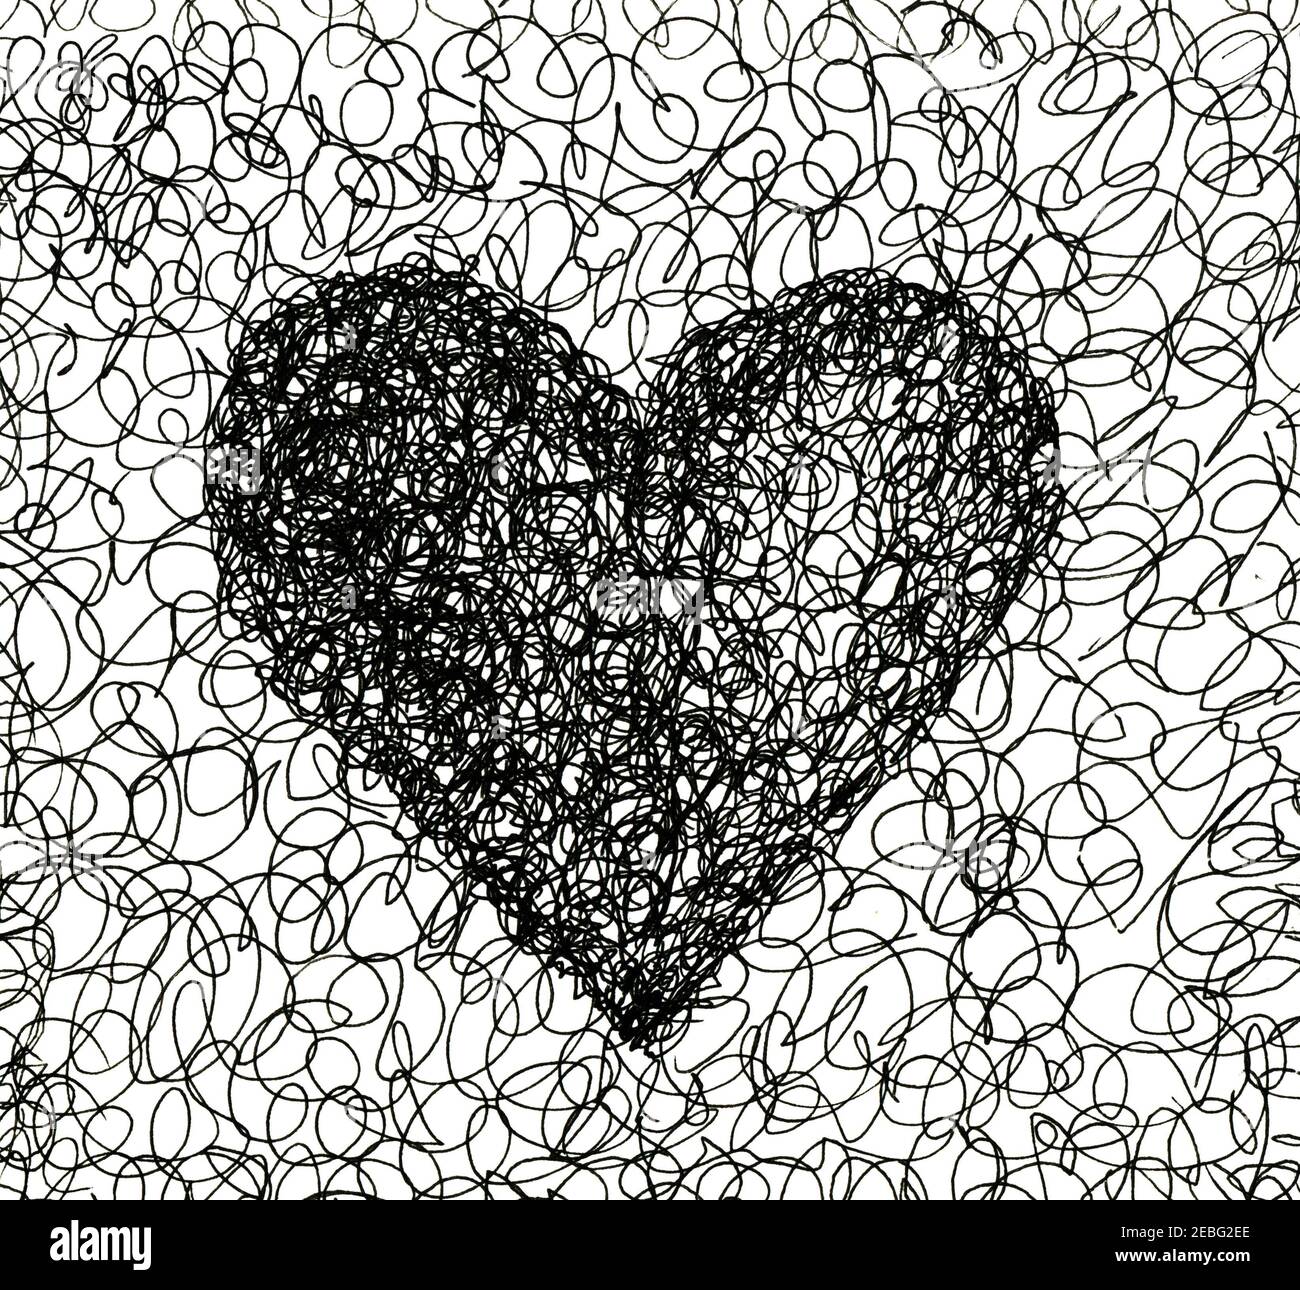 Ballpoint pen curl heart. Graphic black heart. Chaotic hand-drawn doodles. Valentine's Day. Love symbol. Stock Photo